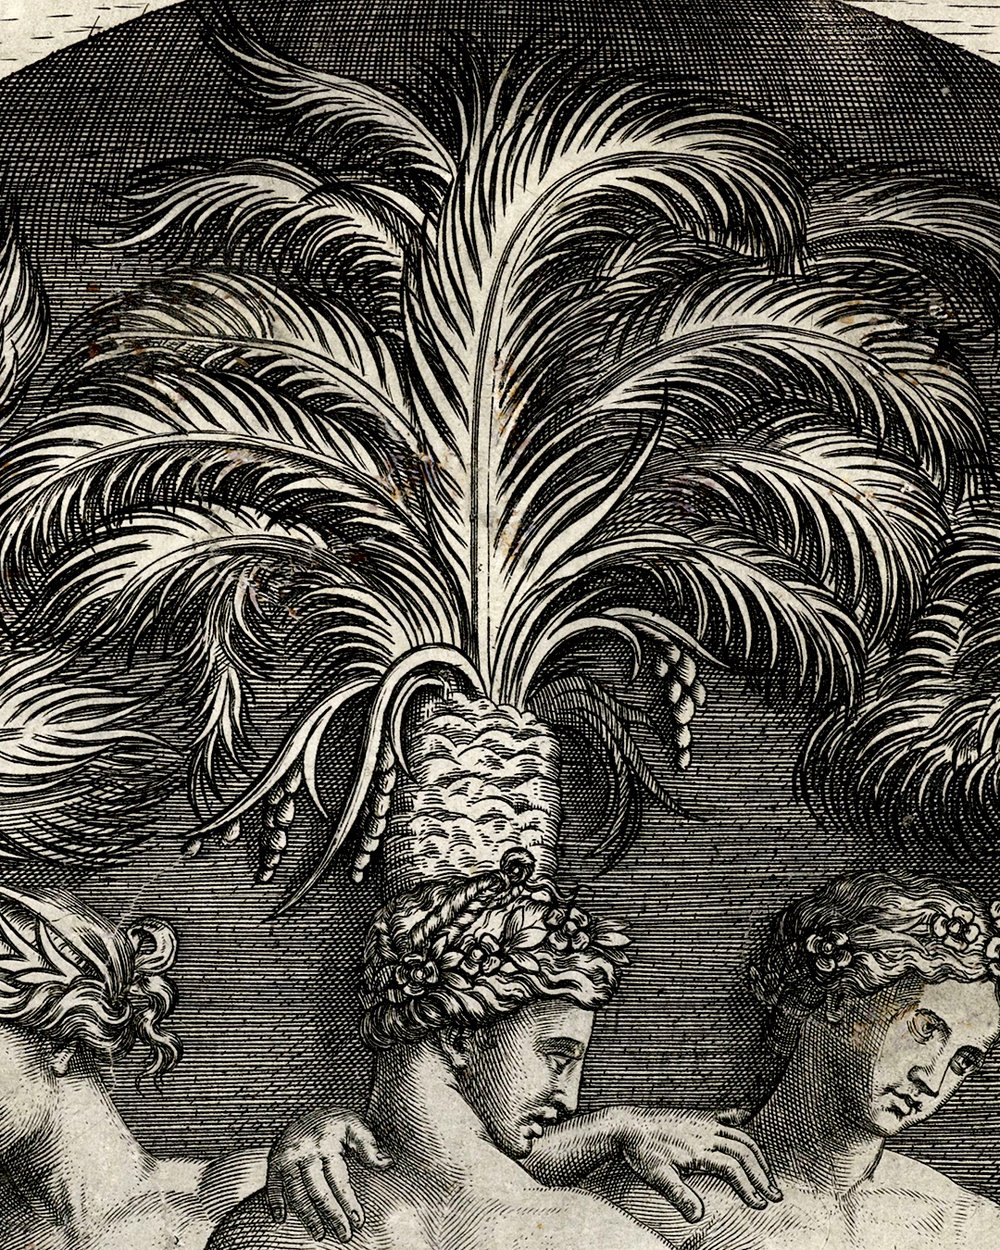 "Three graces standing in niche in front of three palm trees" (1510 - 1527)